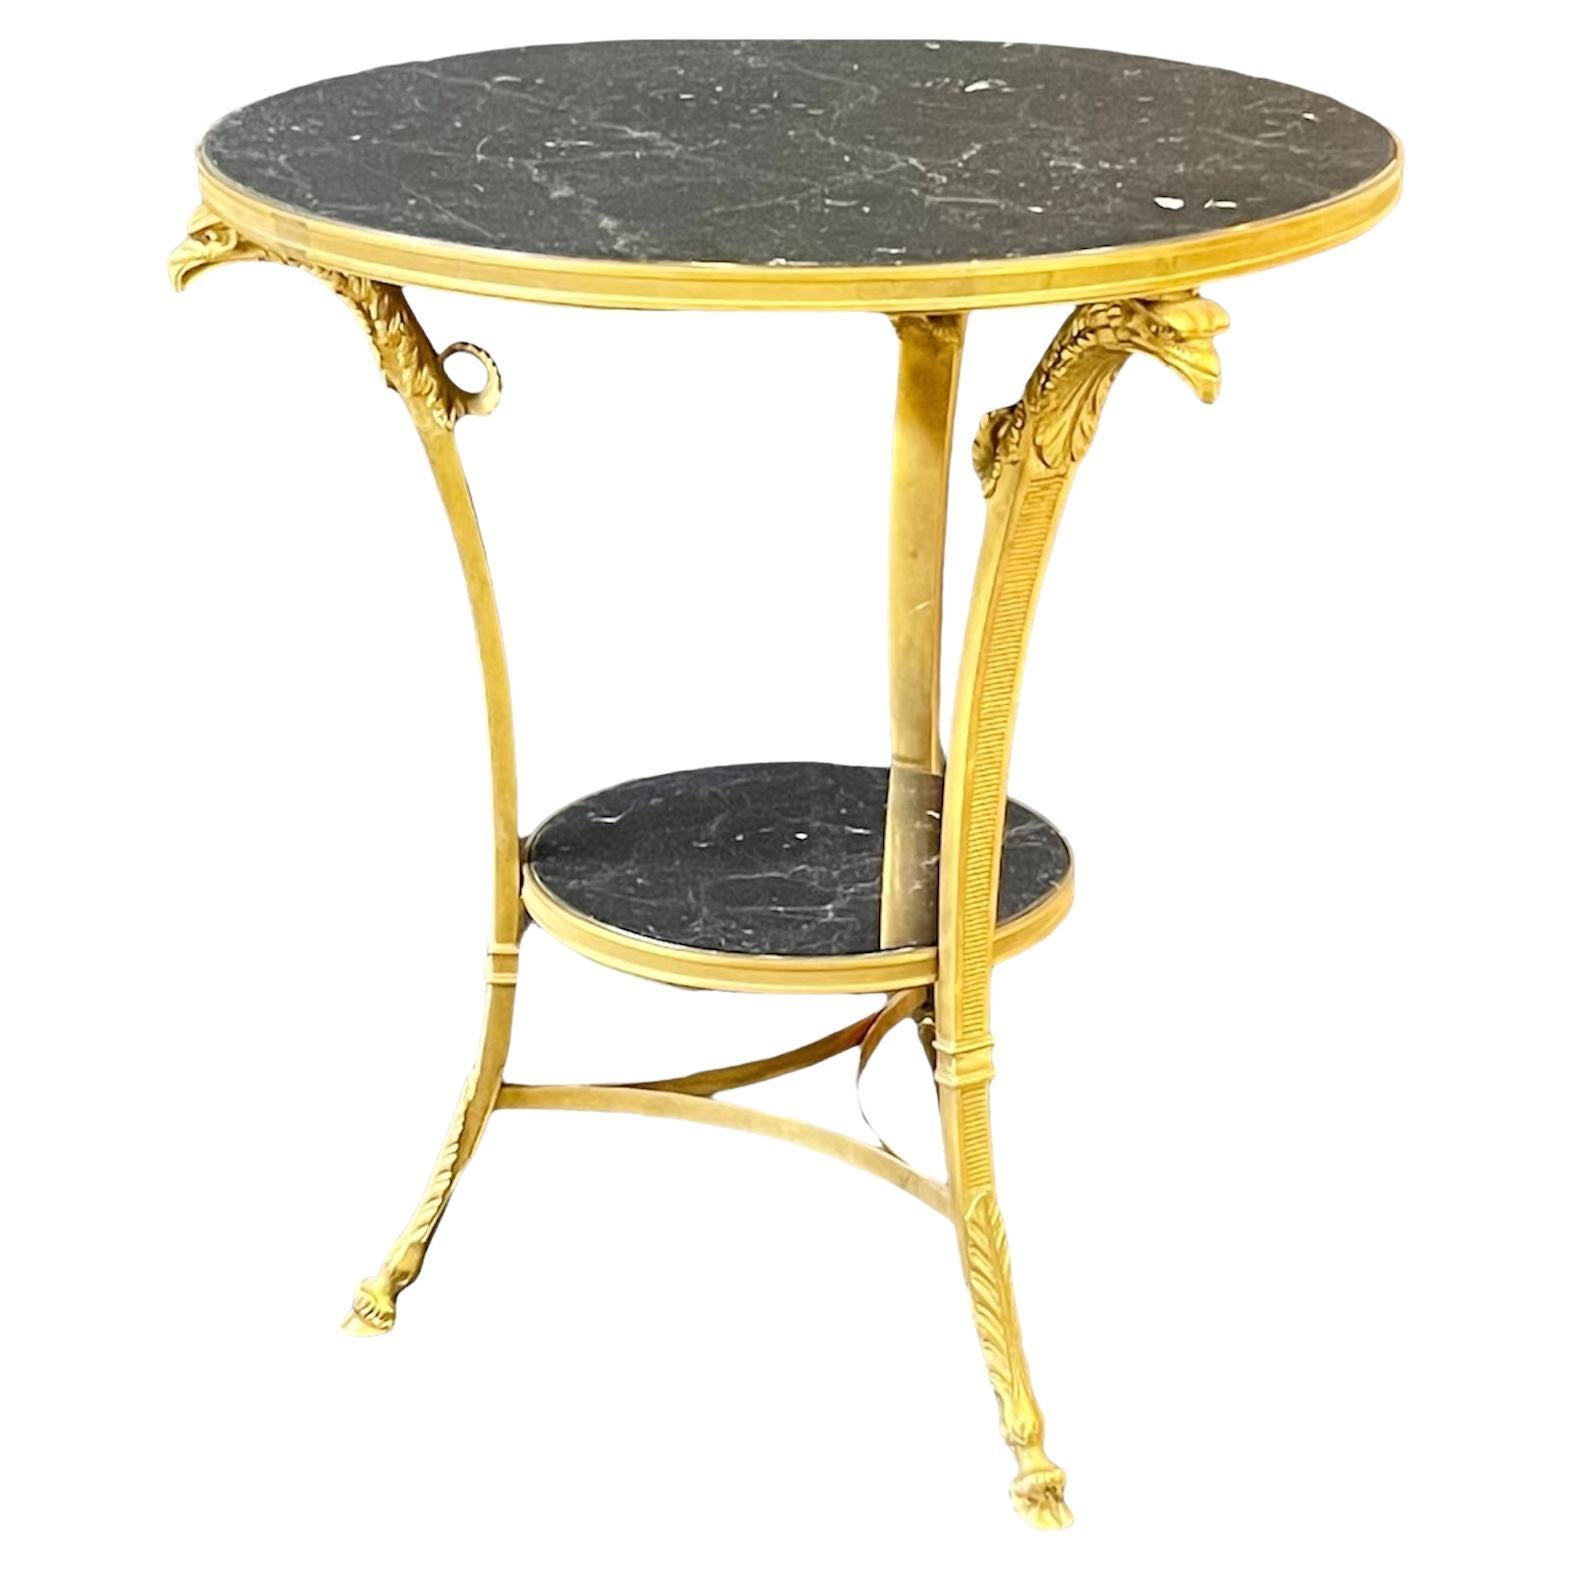 Very fine early 20th century French Empire style gueridon table of gilt bronze and marble. A circular tabletop of black marble with white veining is held by a decorative ribbed banding. The gilt bronze frame is comprised of three downswept legs